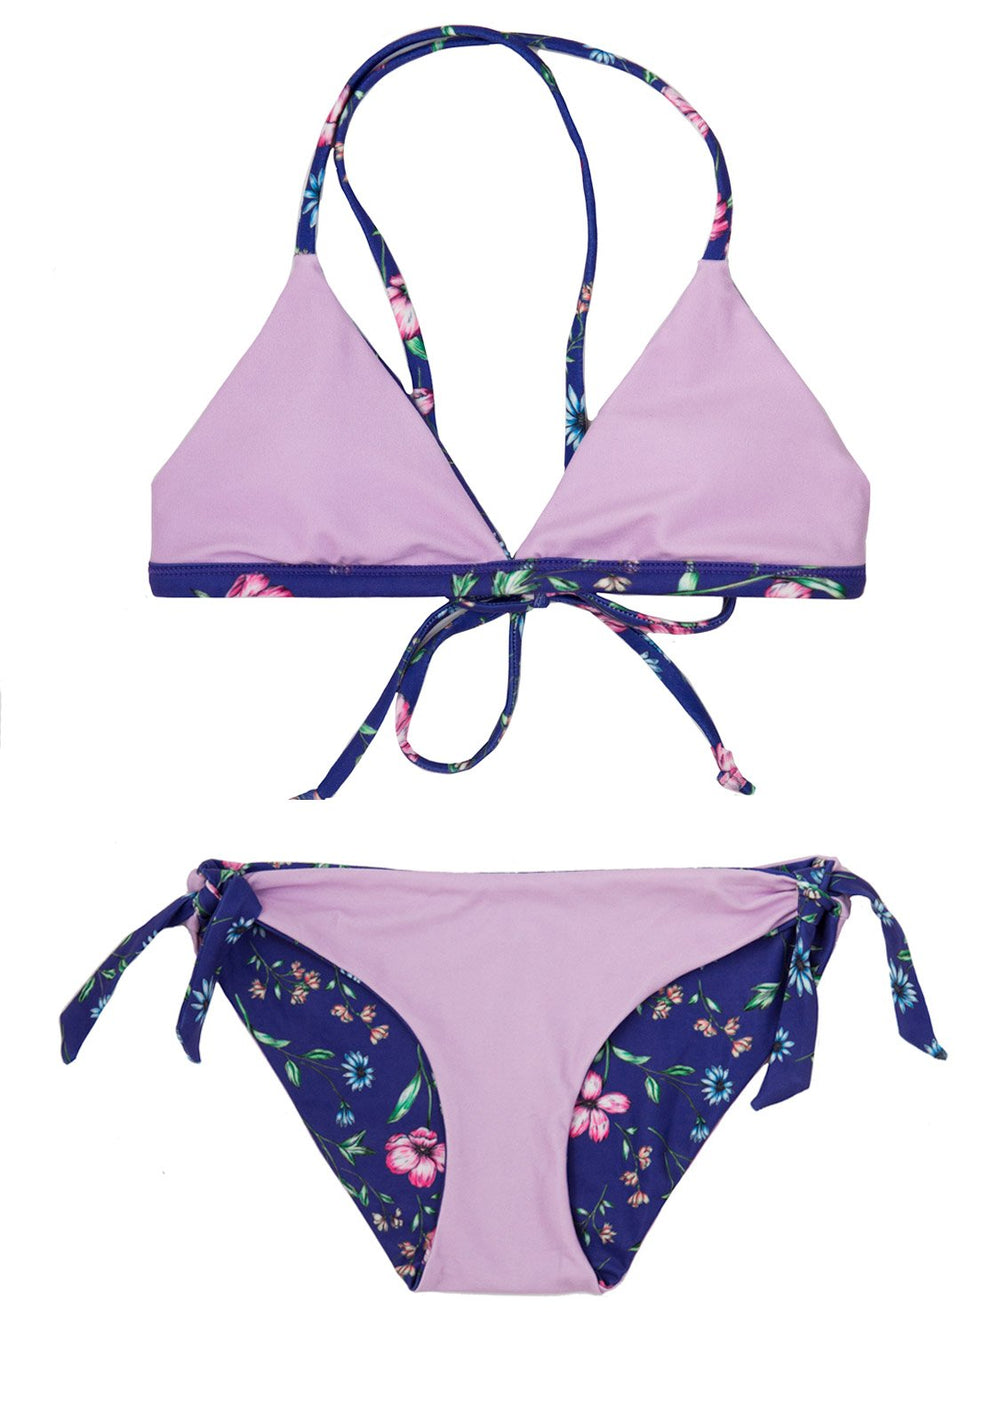 Purple Floral Bikini - 2 Piece SET for Girls with Padded TRIANGLE Top